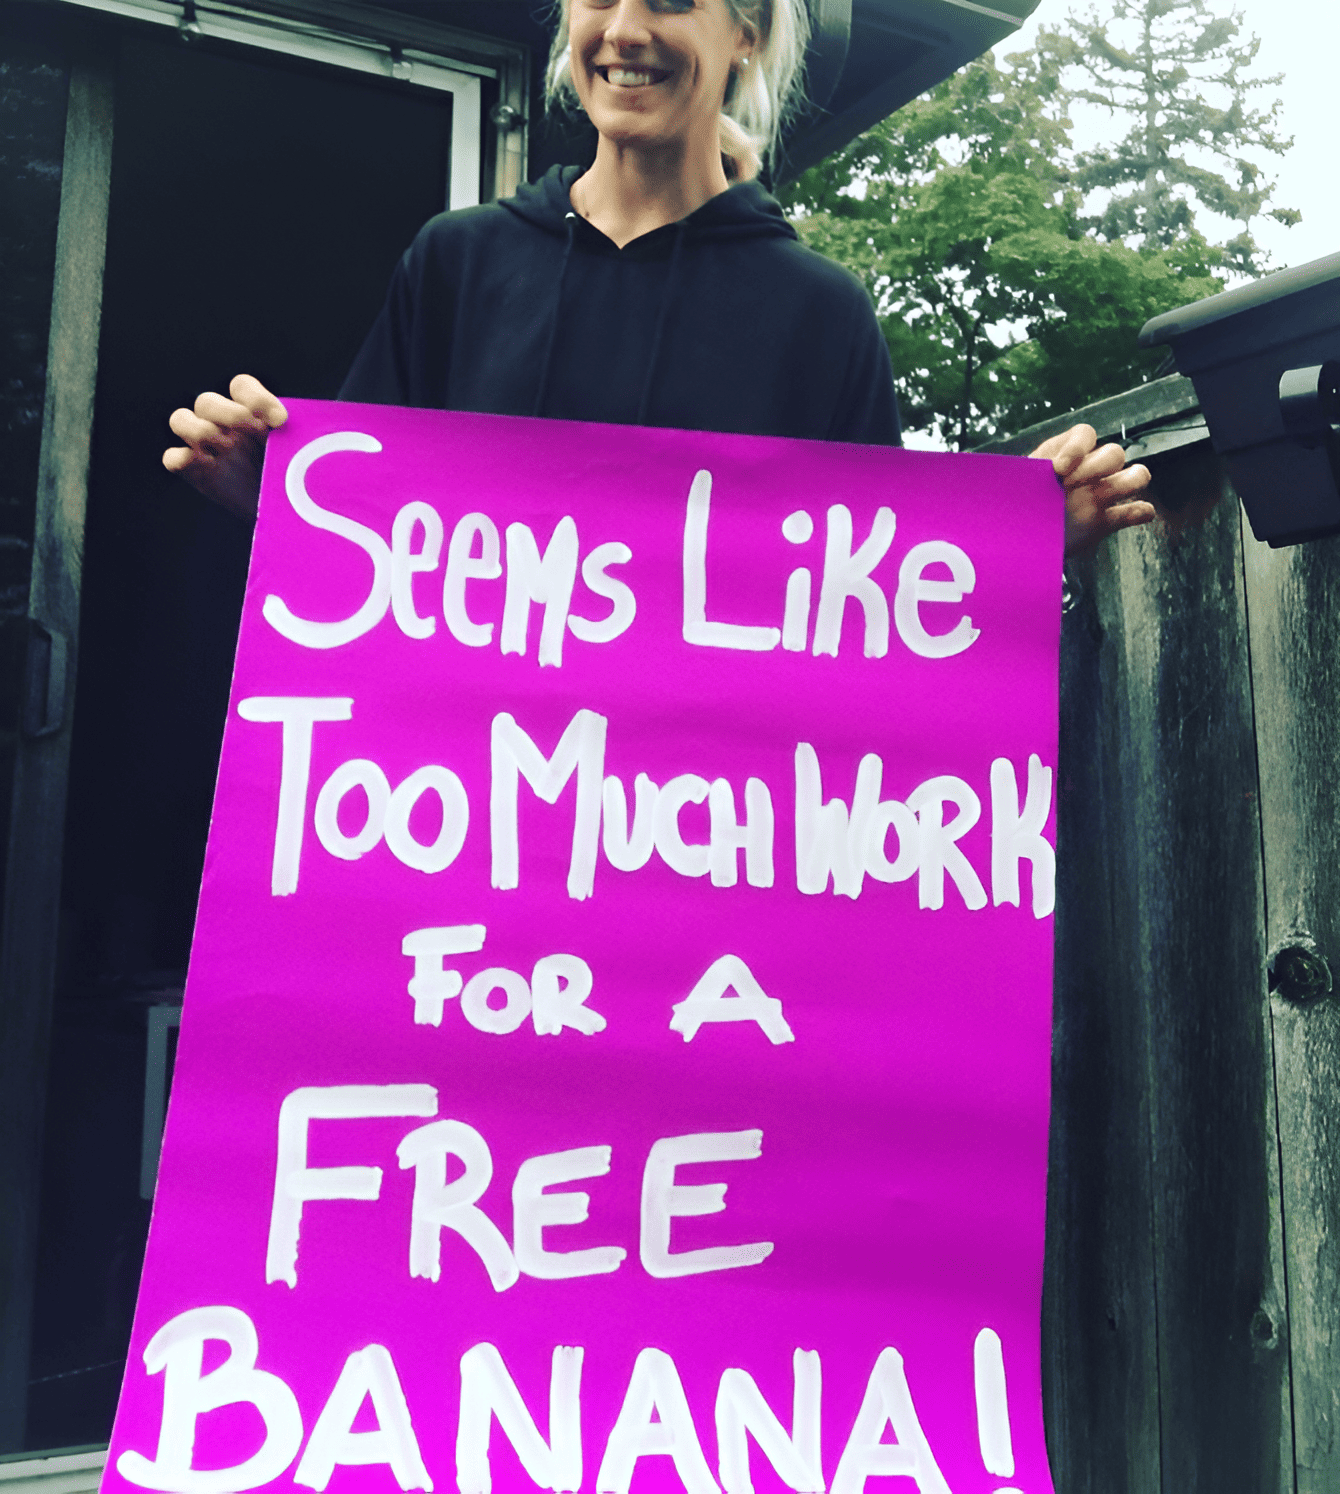 A woman holding a marathon race sign that says seems like too much work for a free banana.